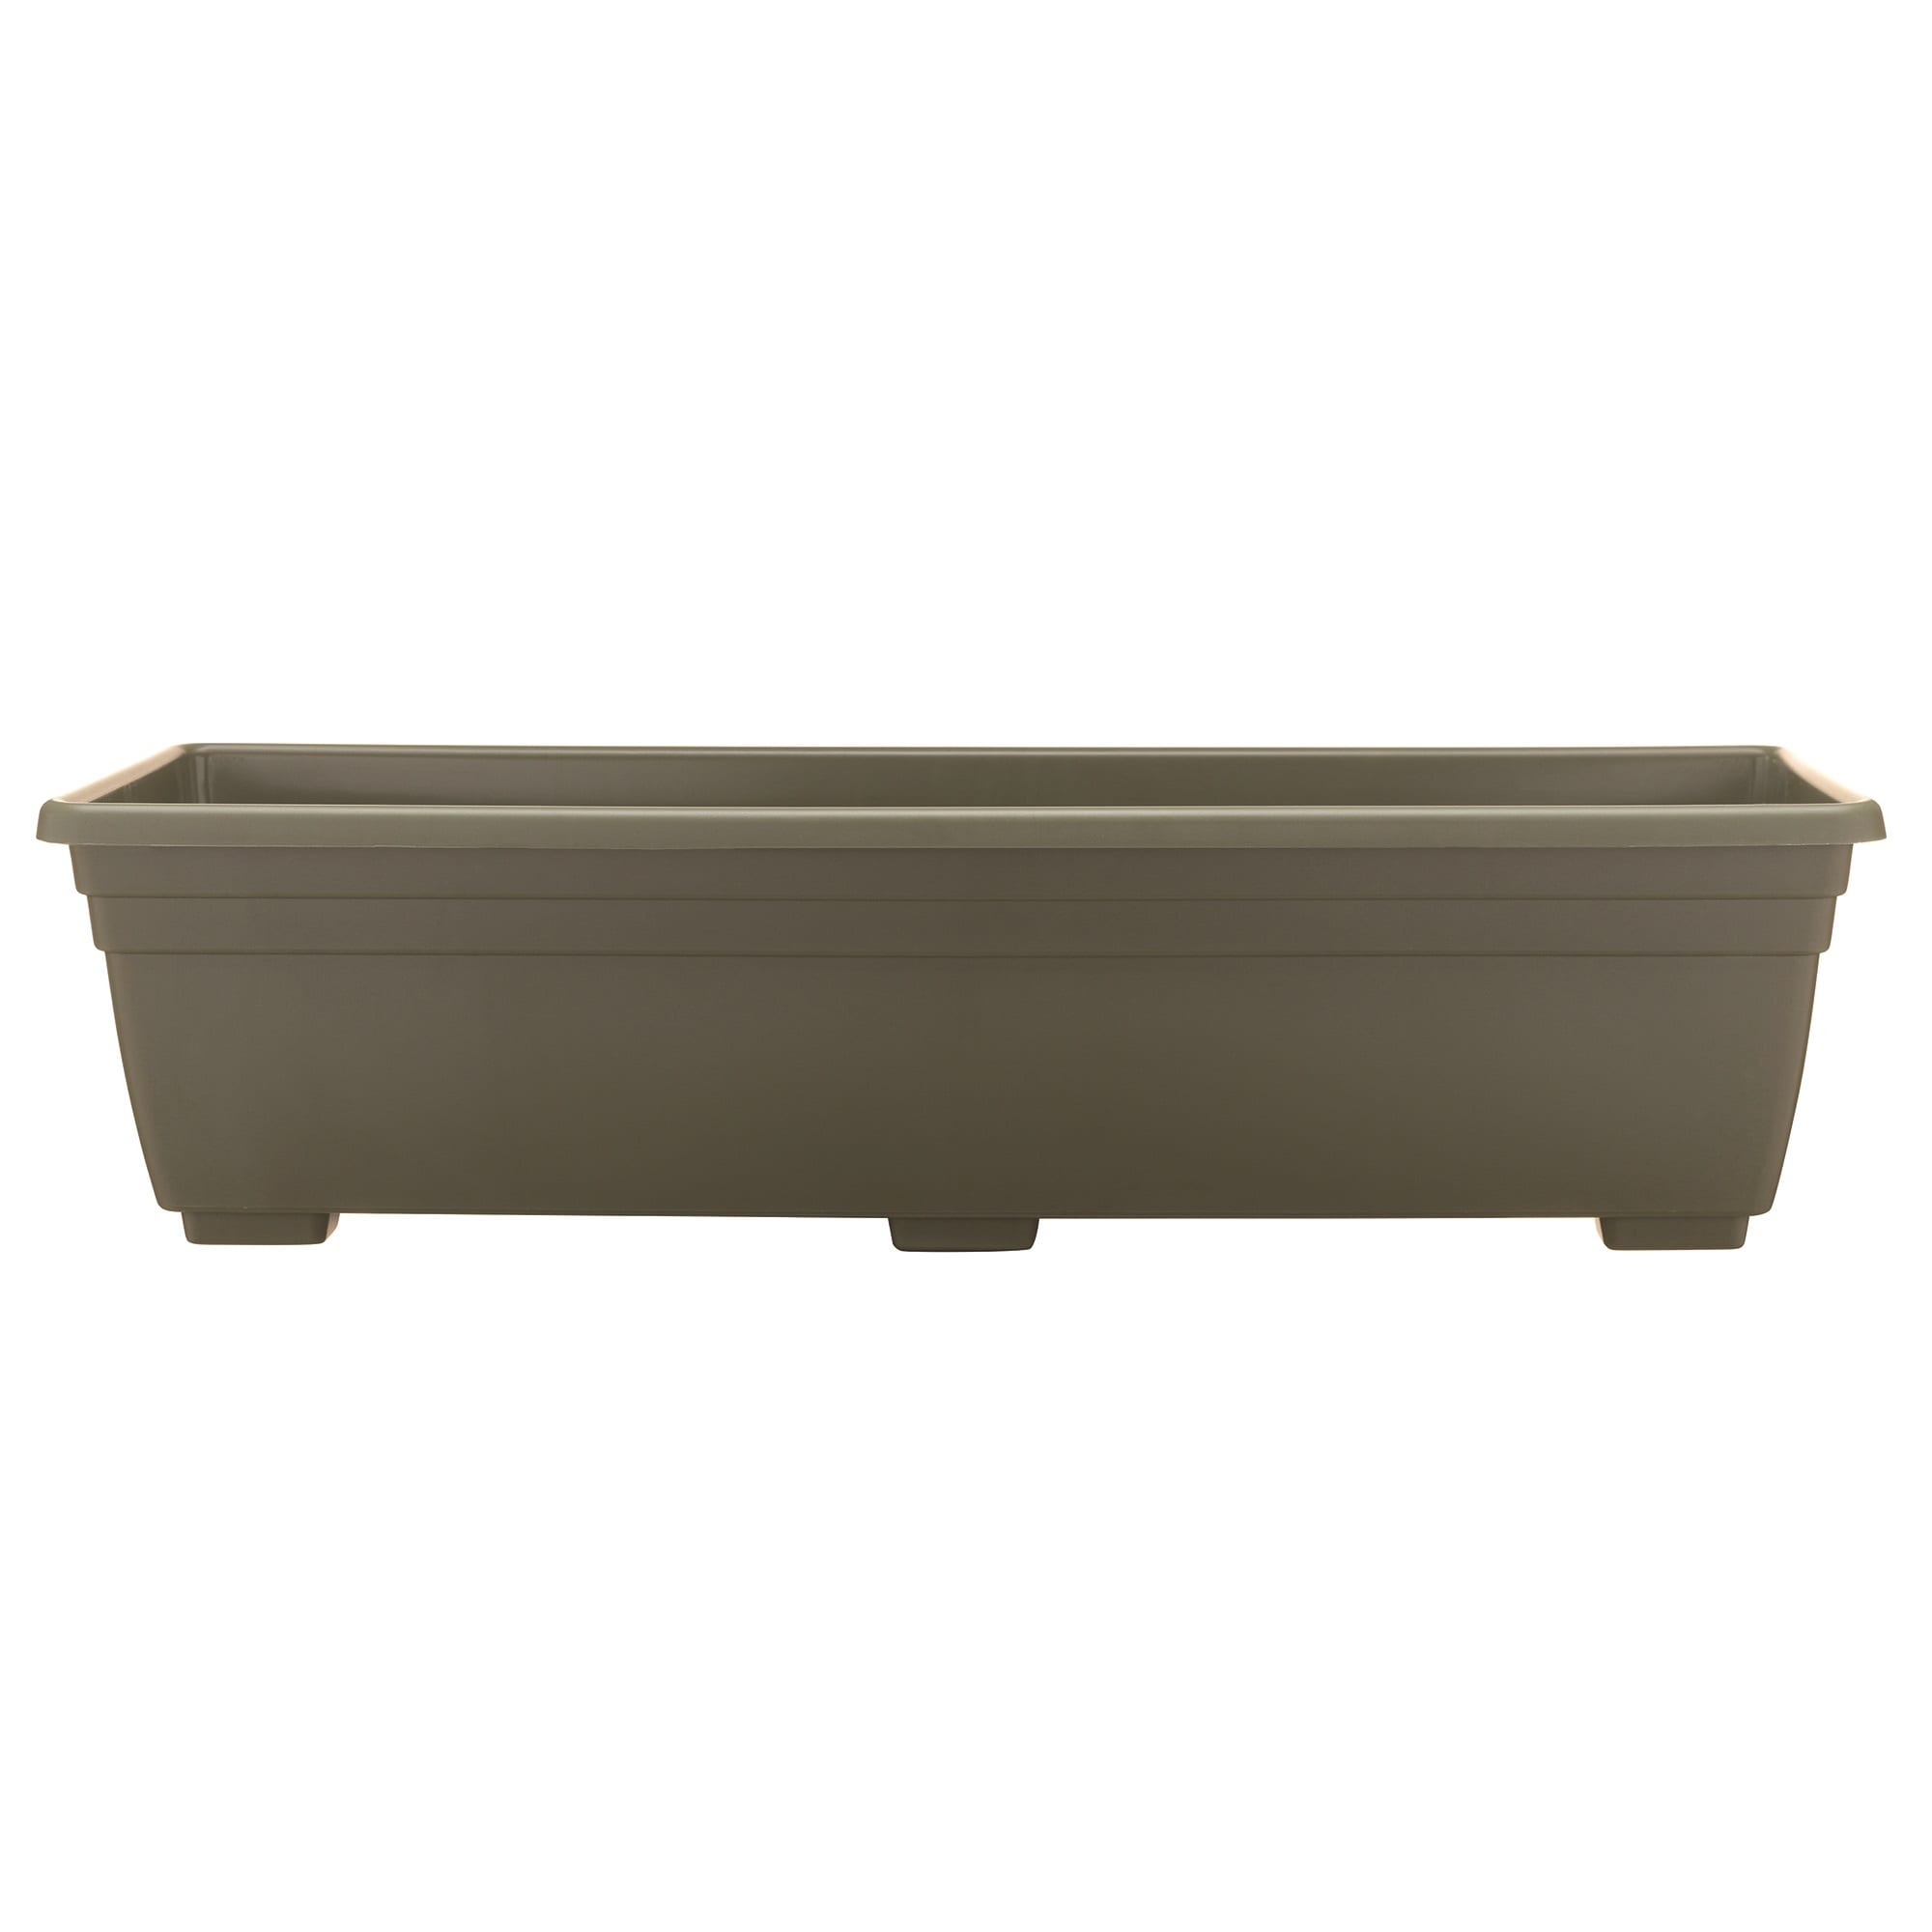 35.75-in W x 6.6-in H Green Plastic Traditional Window Box at Lowes.com